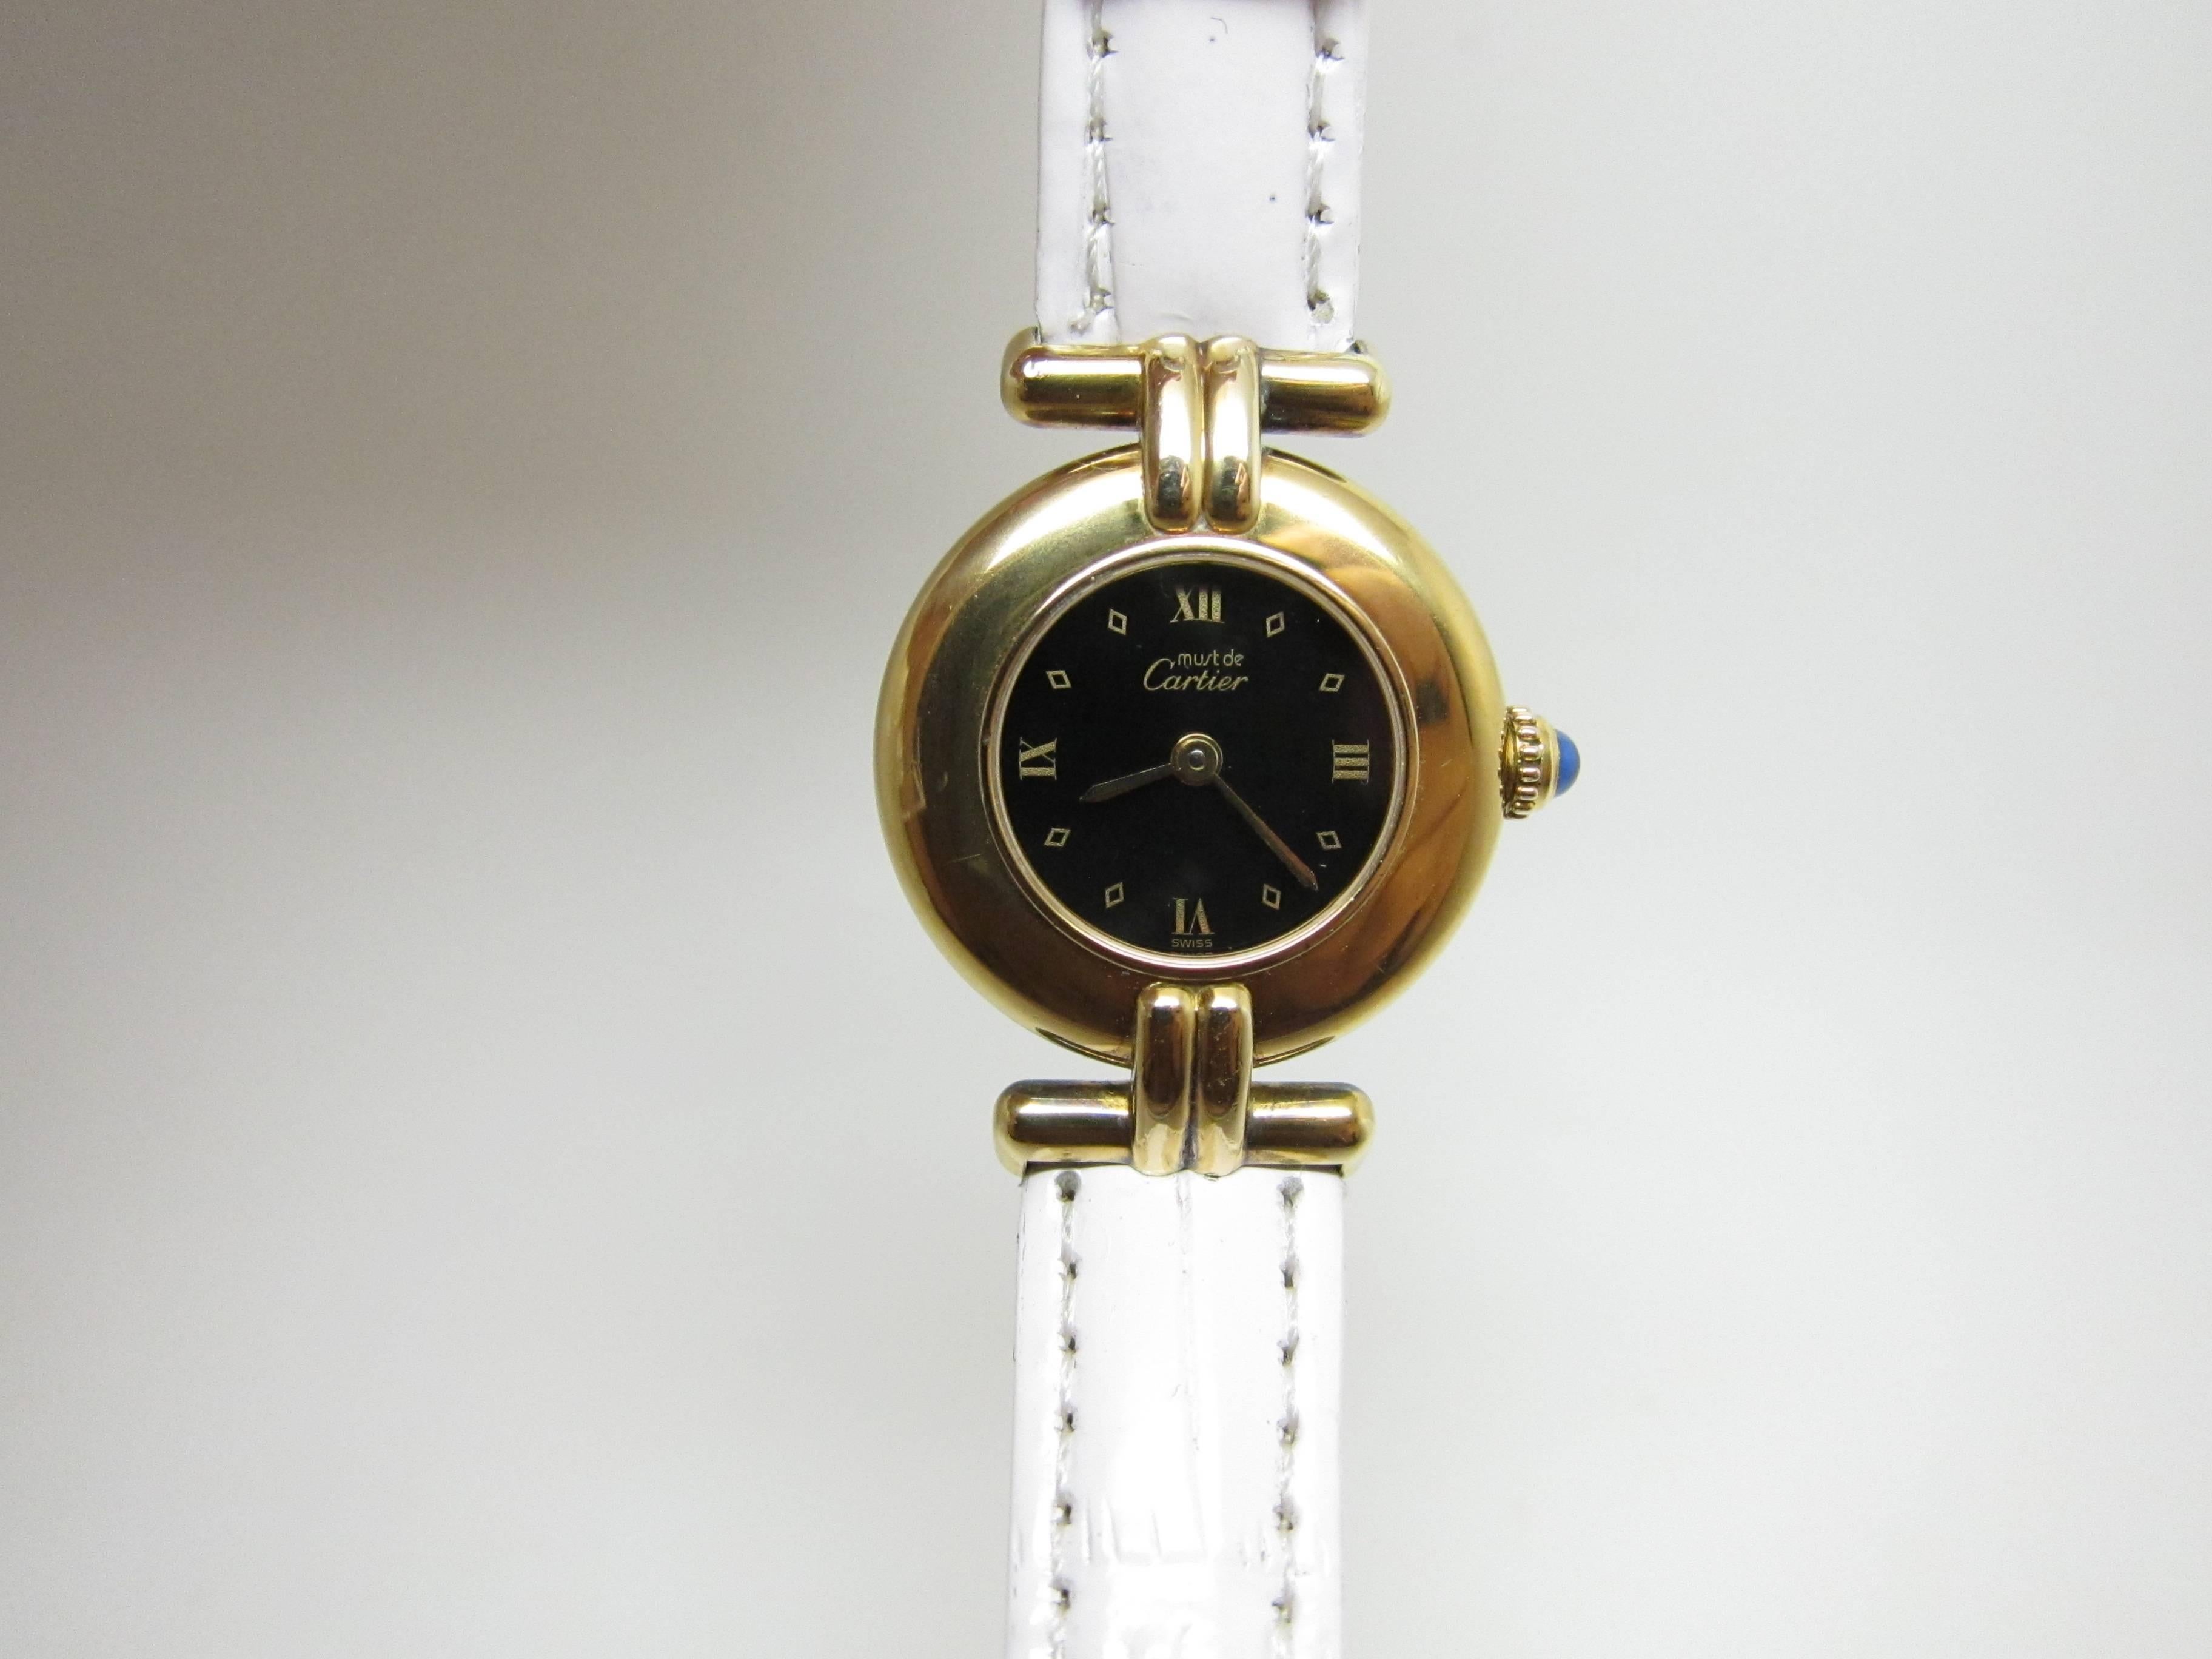 Nicevintage Must de Cartier Rivoli watch witjh gold plated case.

generic band and buckle not from Cartier

Black dial in good condition

Some minor signs of use but overall good condition for a watch of this age

Case 25mm